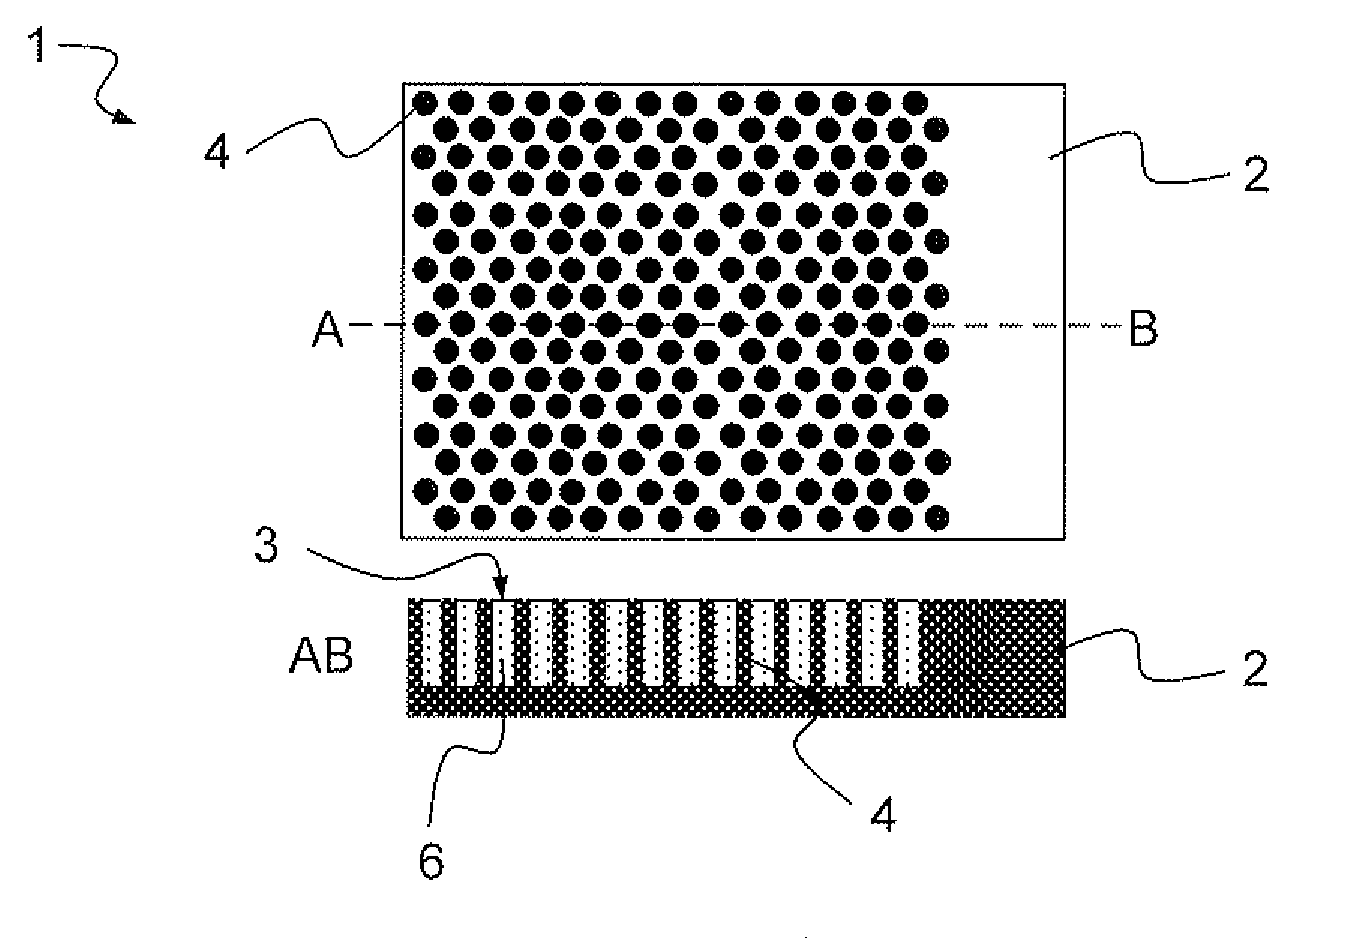  micro-structured surface having tailored wetting properties